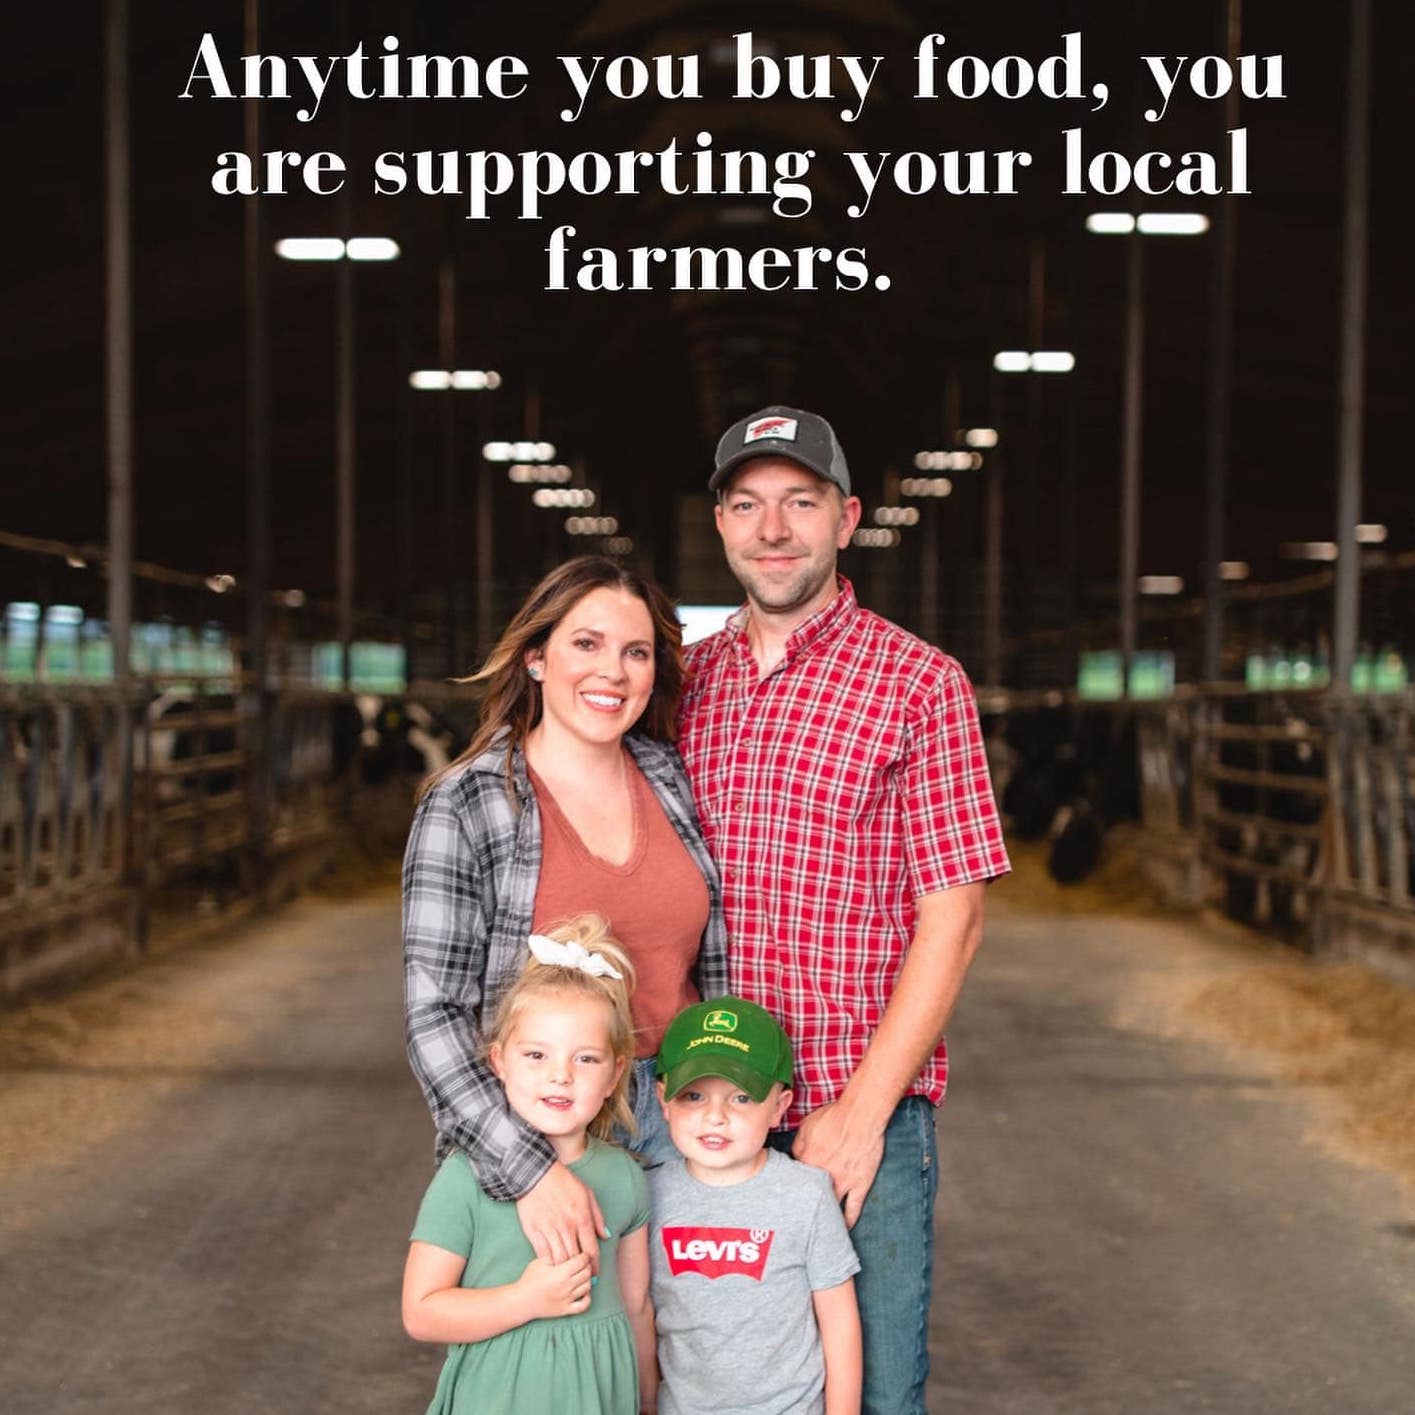 Wisconsin dairy farm family in a freestall barn - anytime you buy food, you are supporting your local farmers.